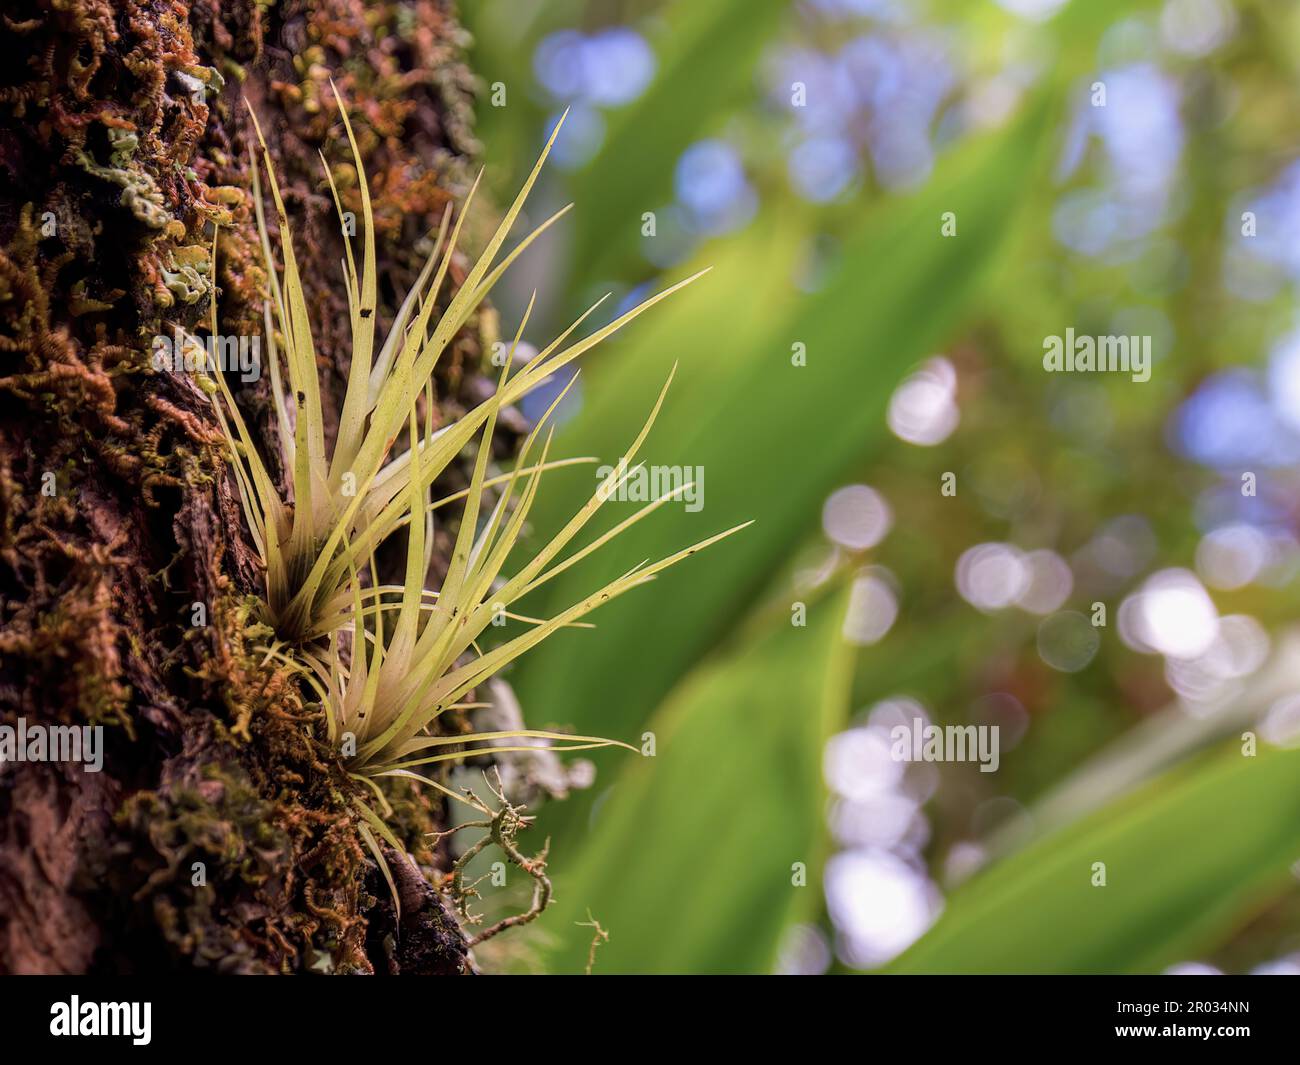 Macro photography of two little tillandsia plants growing from a trunk in a rain forest of the central Andean mountains of Colombia, near the town of Stock Photo